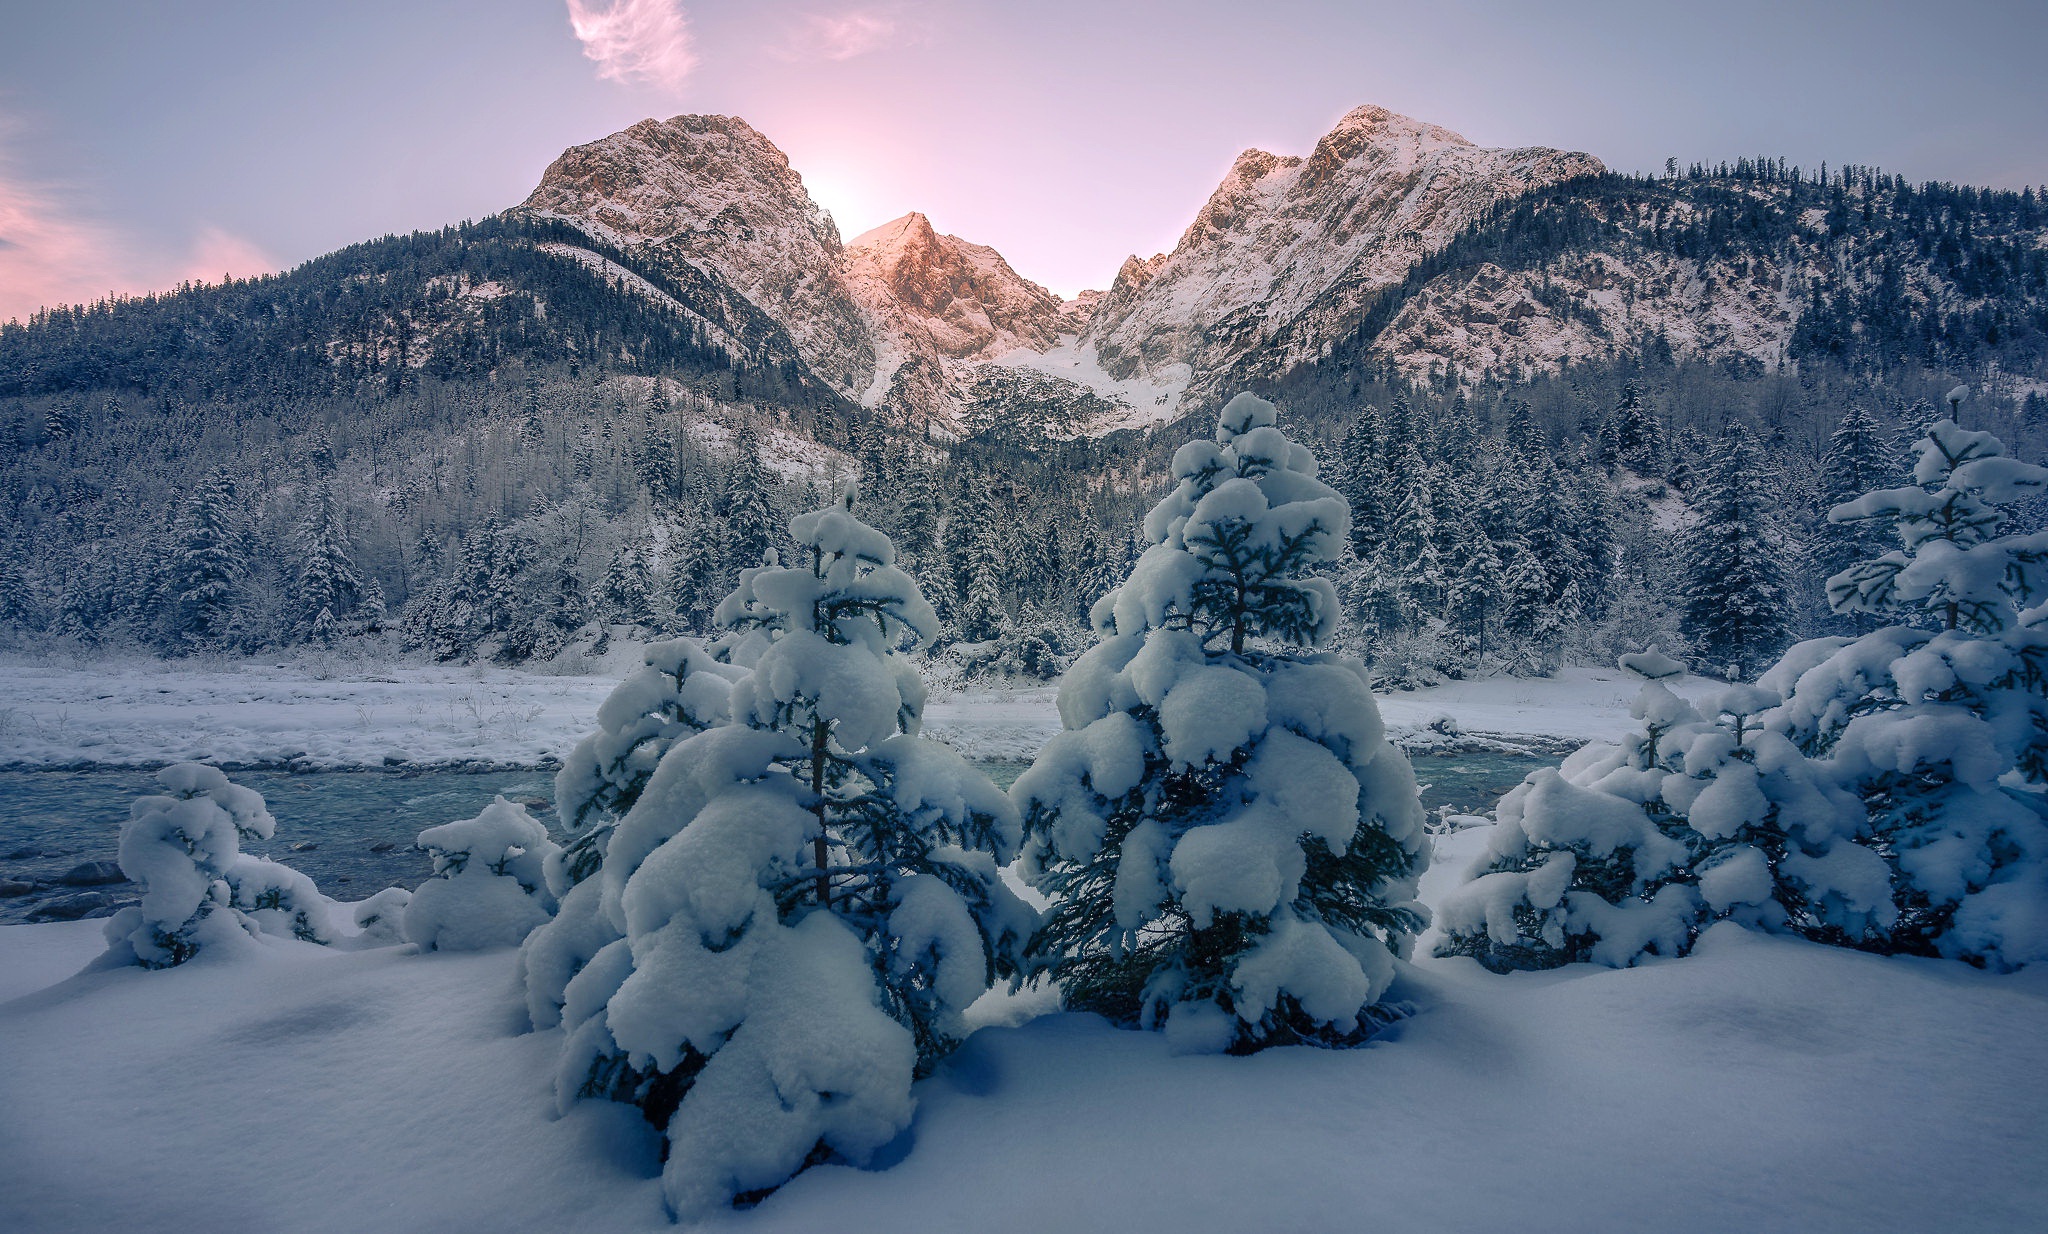 General 2048x1234 snow ice winter cold mountains nature snowy mountain